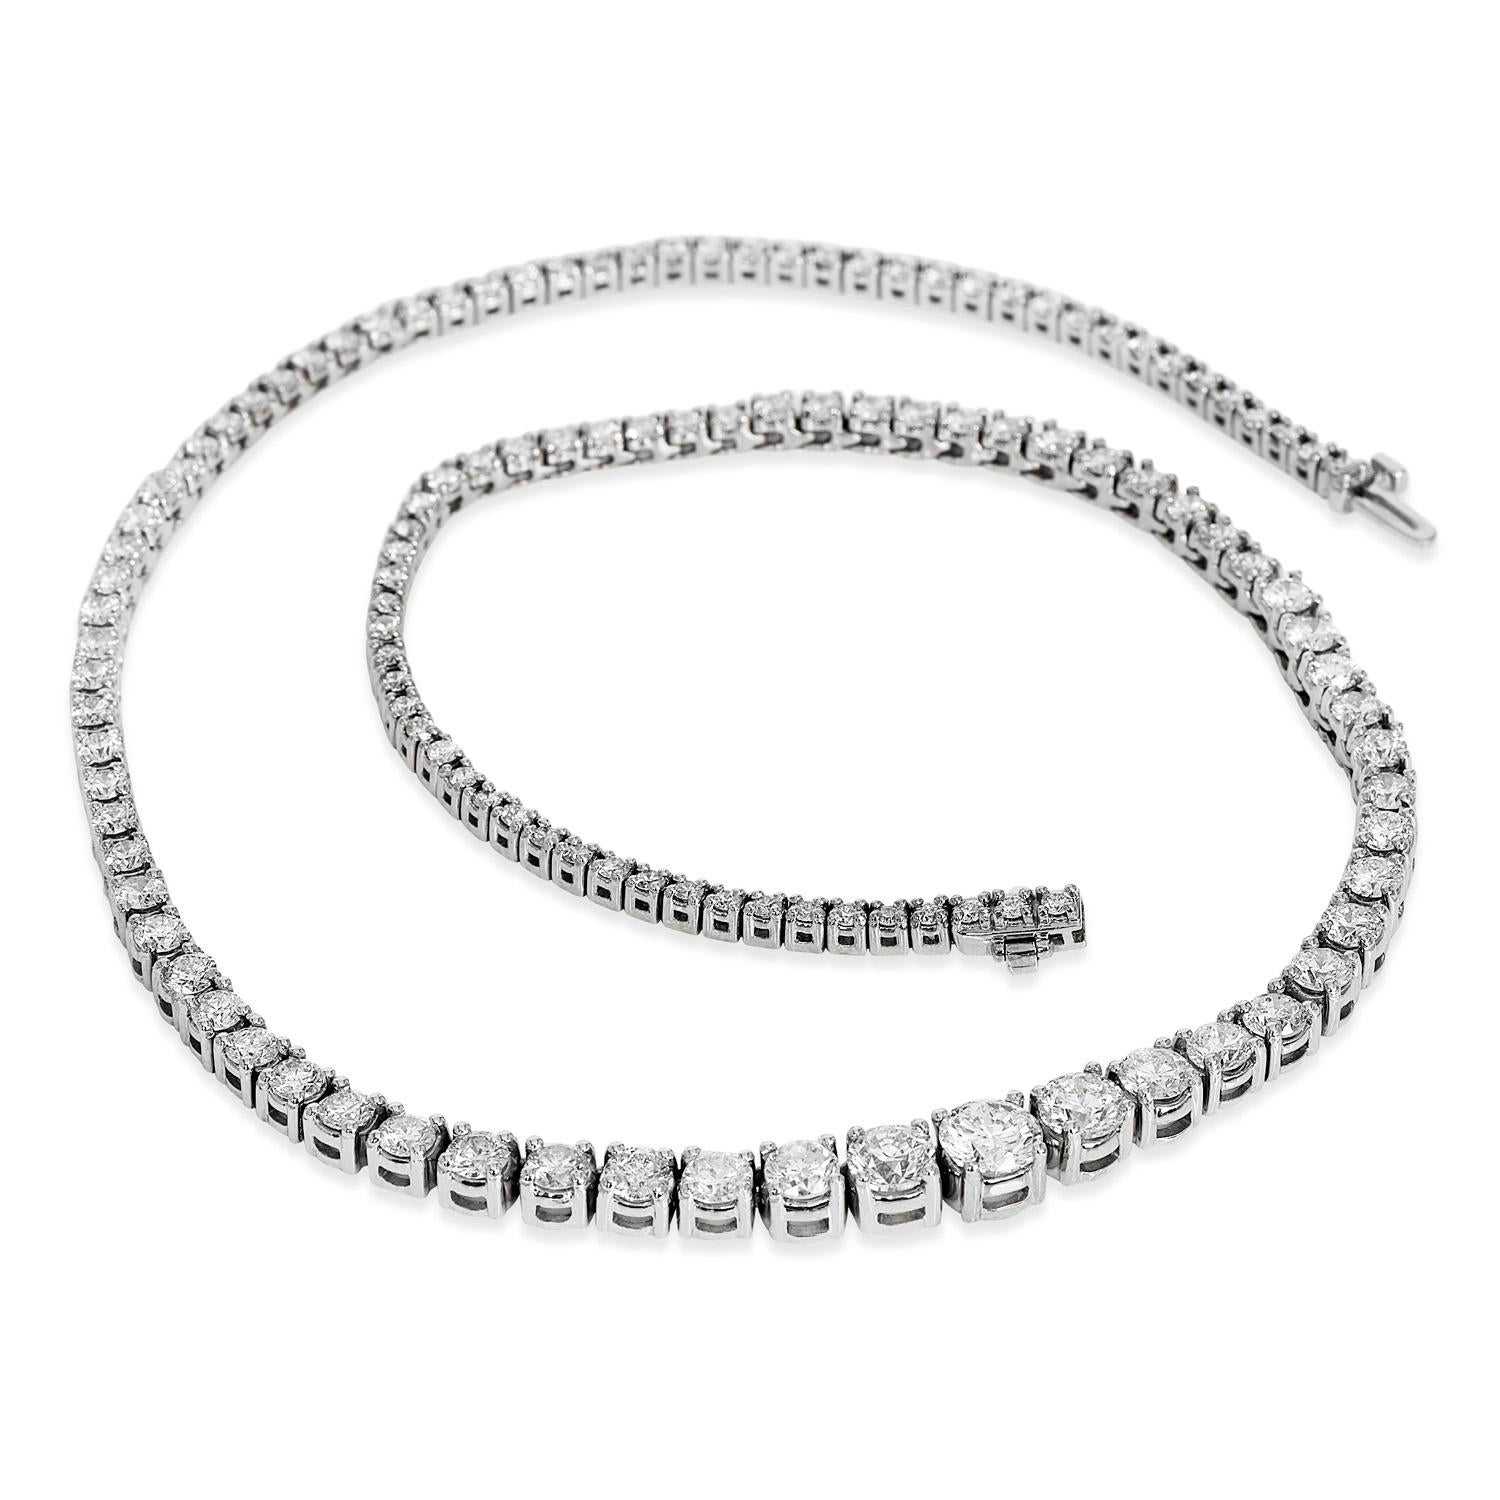  Feel like a celebrity with glamour and elegance with this 17.50-Carat Diamond Riviera Style Graduated Tennis Necklace! 

The vivid sparkling diamonds range from 1.00 carats to 0.05 carats. The dazzling graduated diamonds line side by side to